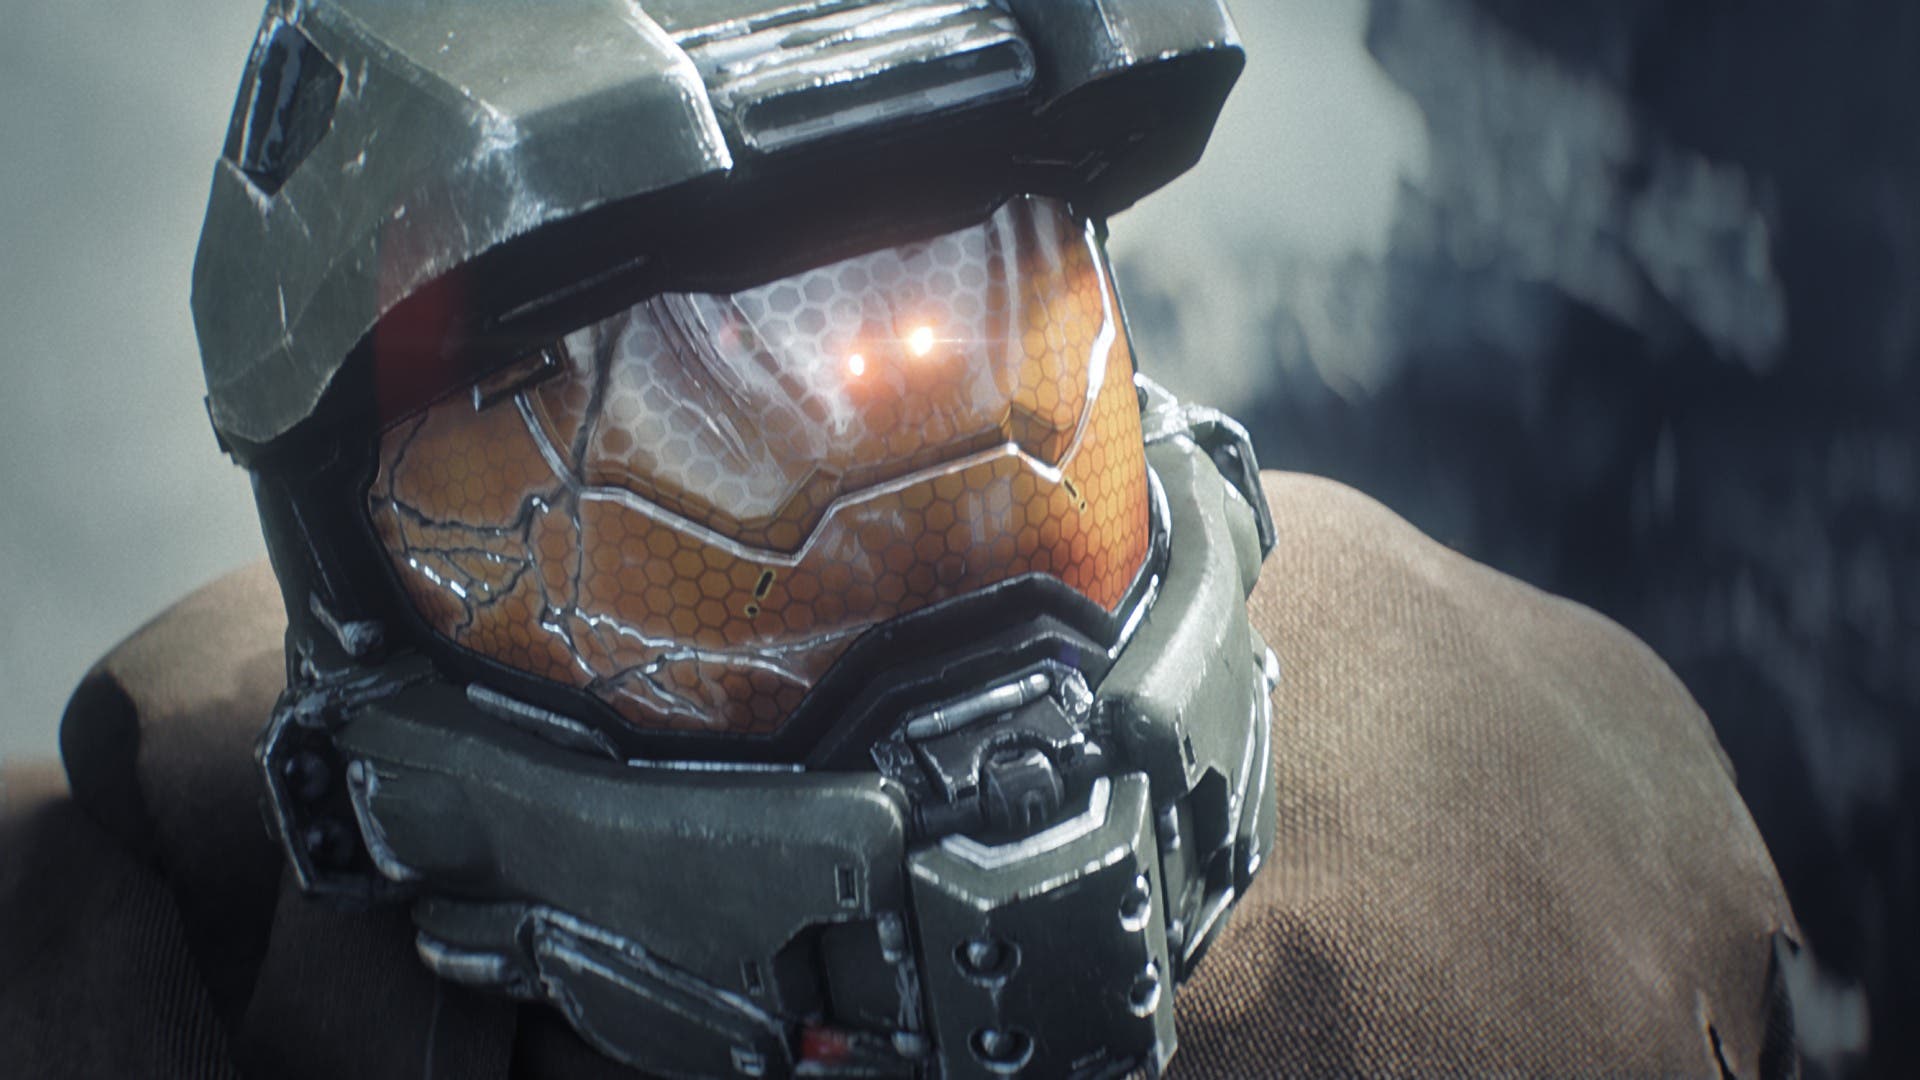 halo 5 cover art shows off new spartans t32s.1920